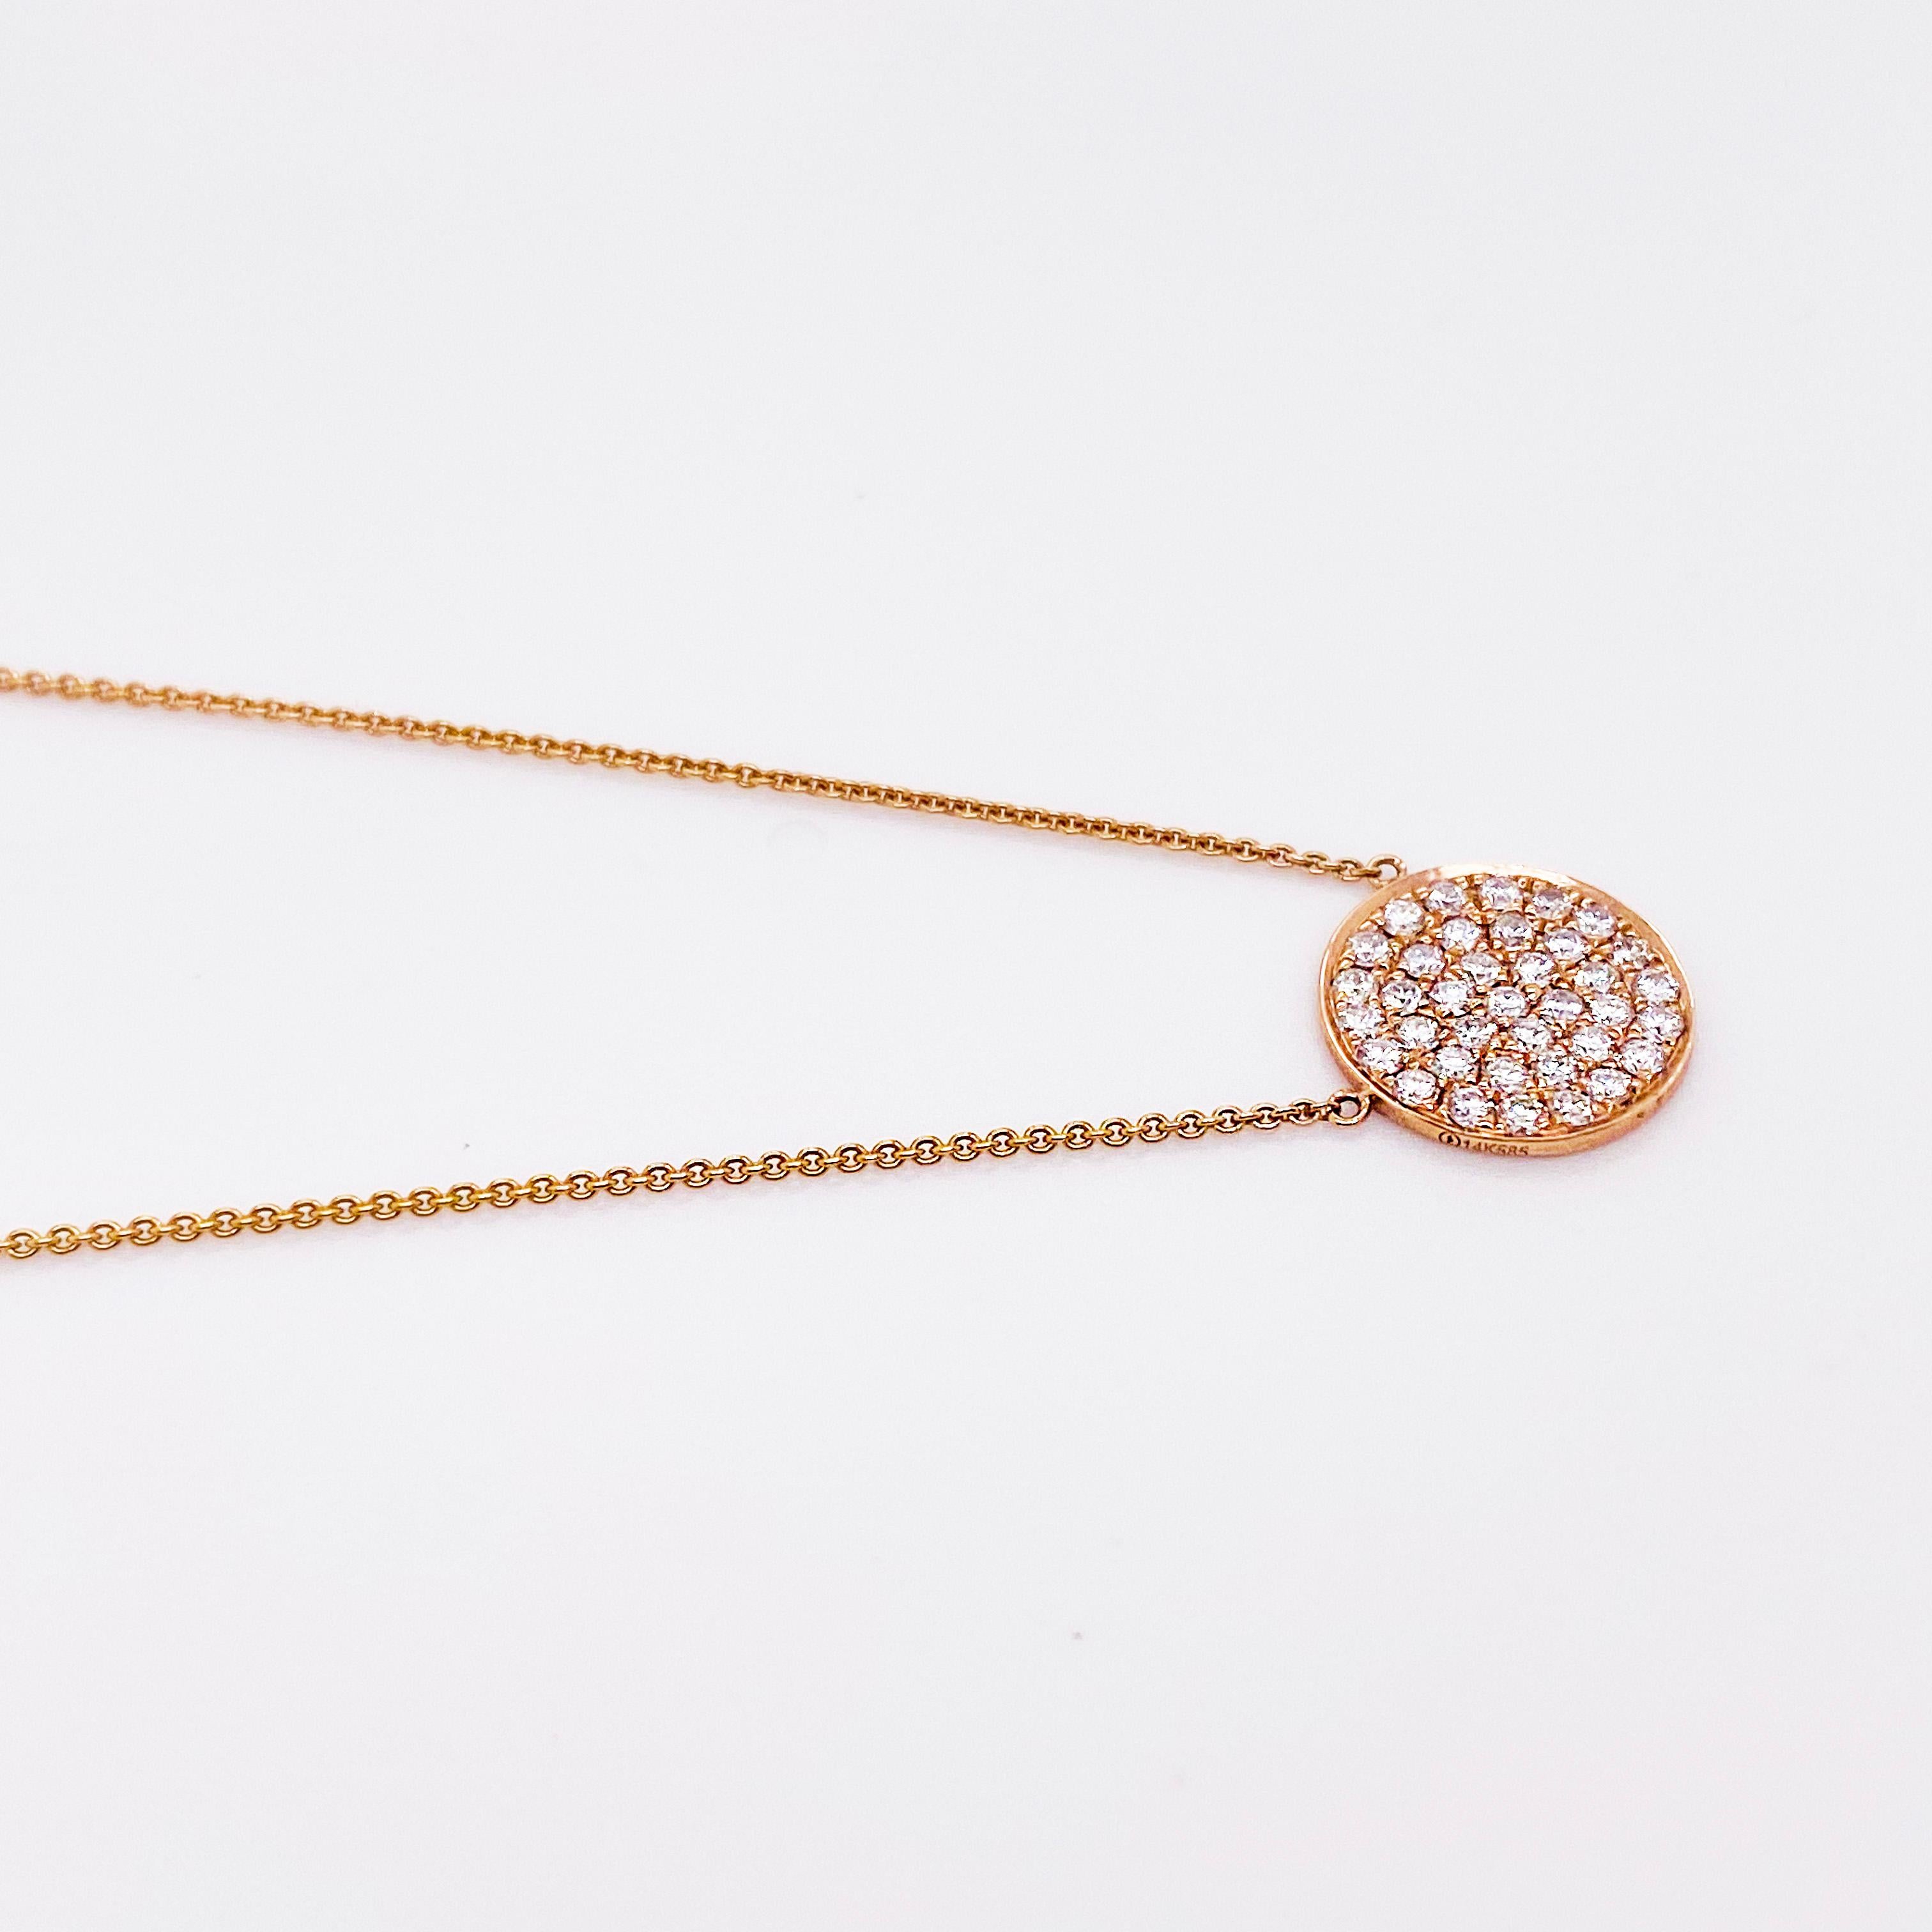 Diamond pave disk necklace that compliments every outfit! The rose gold diamond disk necklace has a 14 karat rose gold disk with round brilliant diamonds pave set, covering the top of the disk. The diamonds are amazing quality, G-H color and VS-2